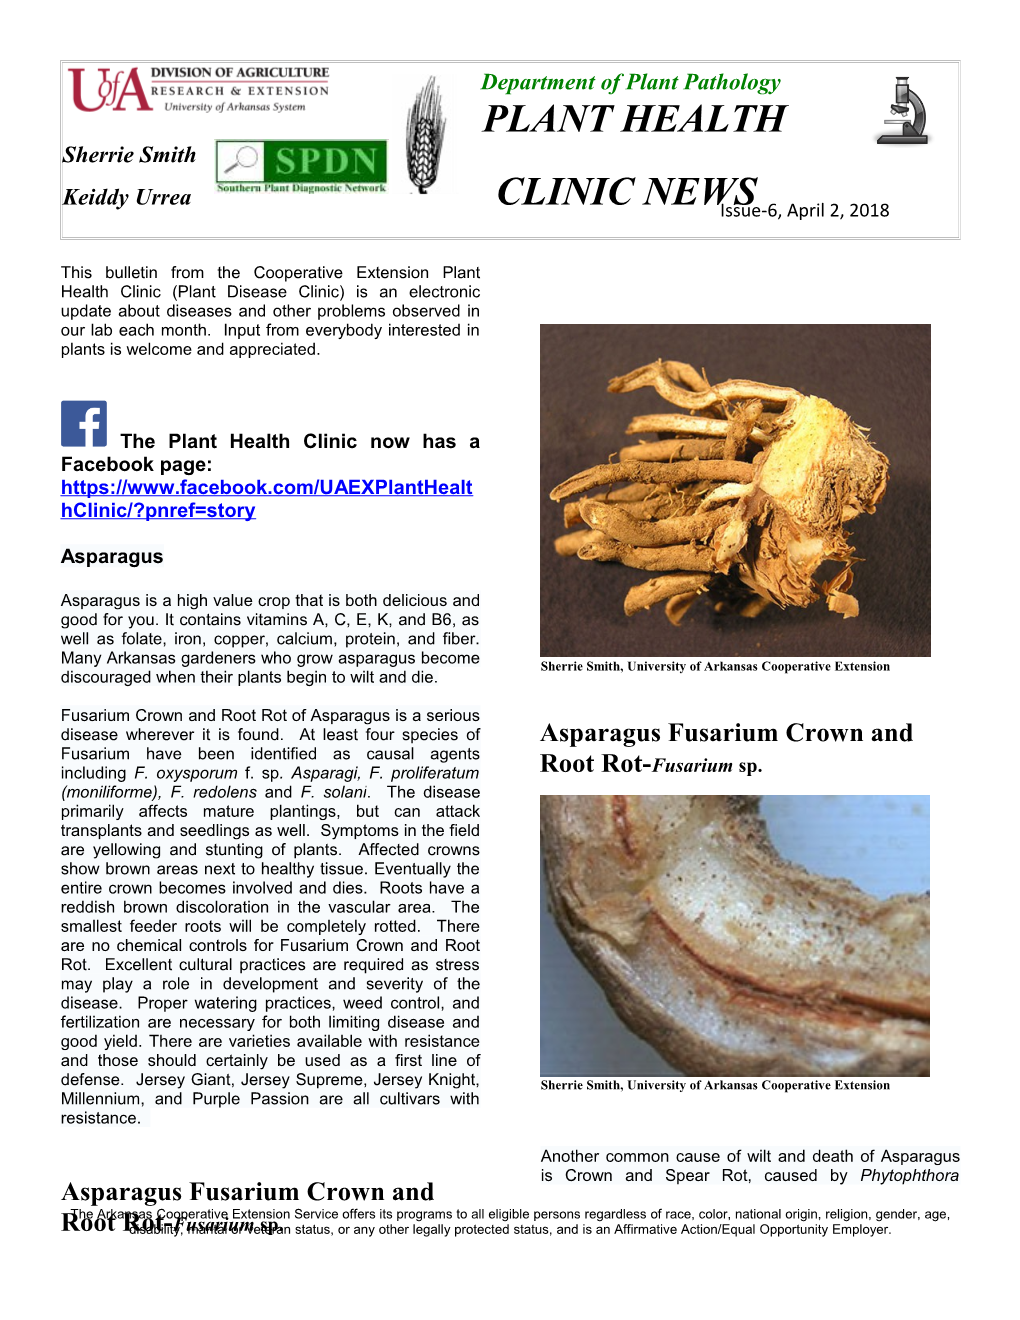 Plant Health Clinic Newsletter-Issue 6, 2018